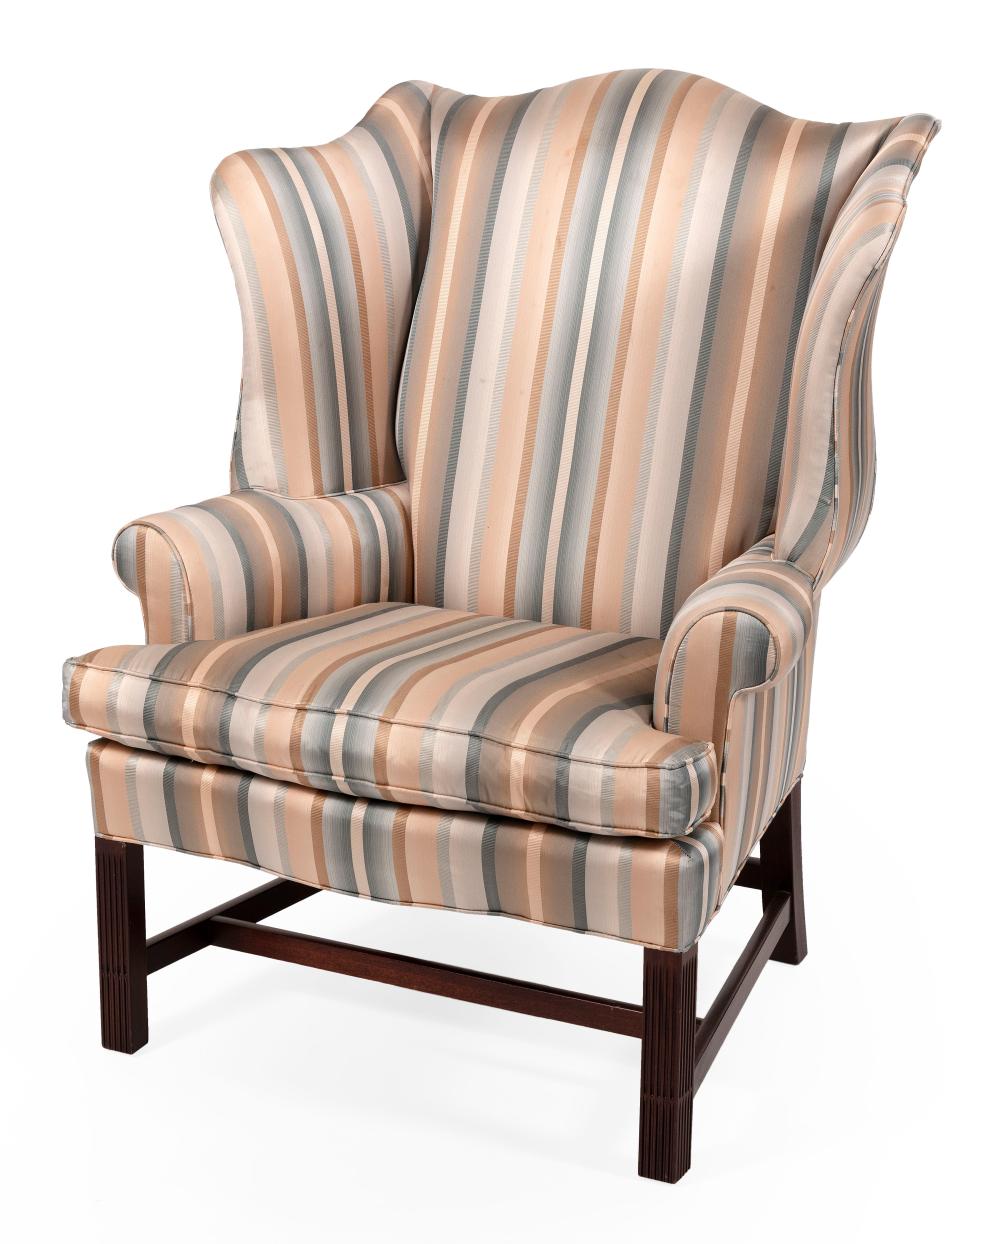 CUSTOM CHIPPENDALE STYLE WING CHAIR 34c03e